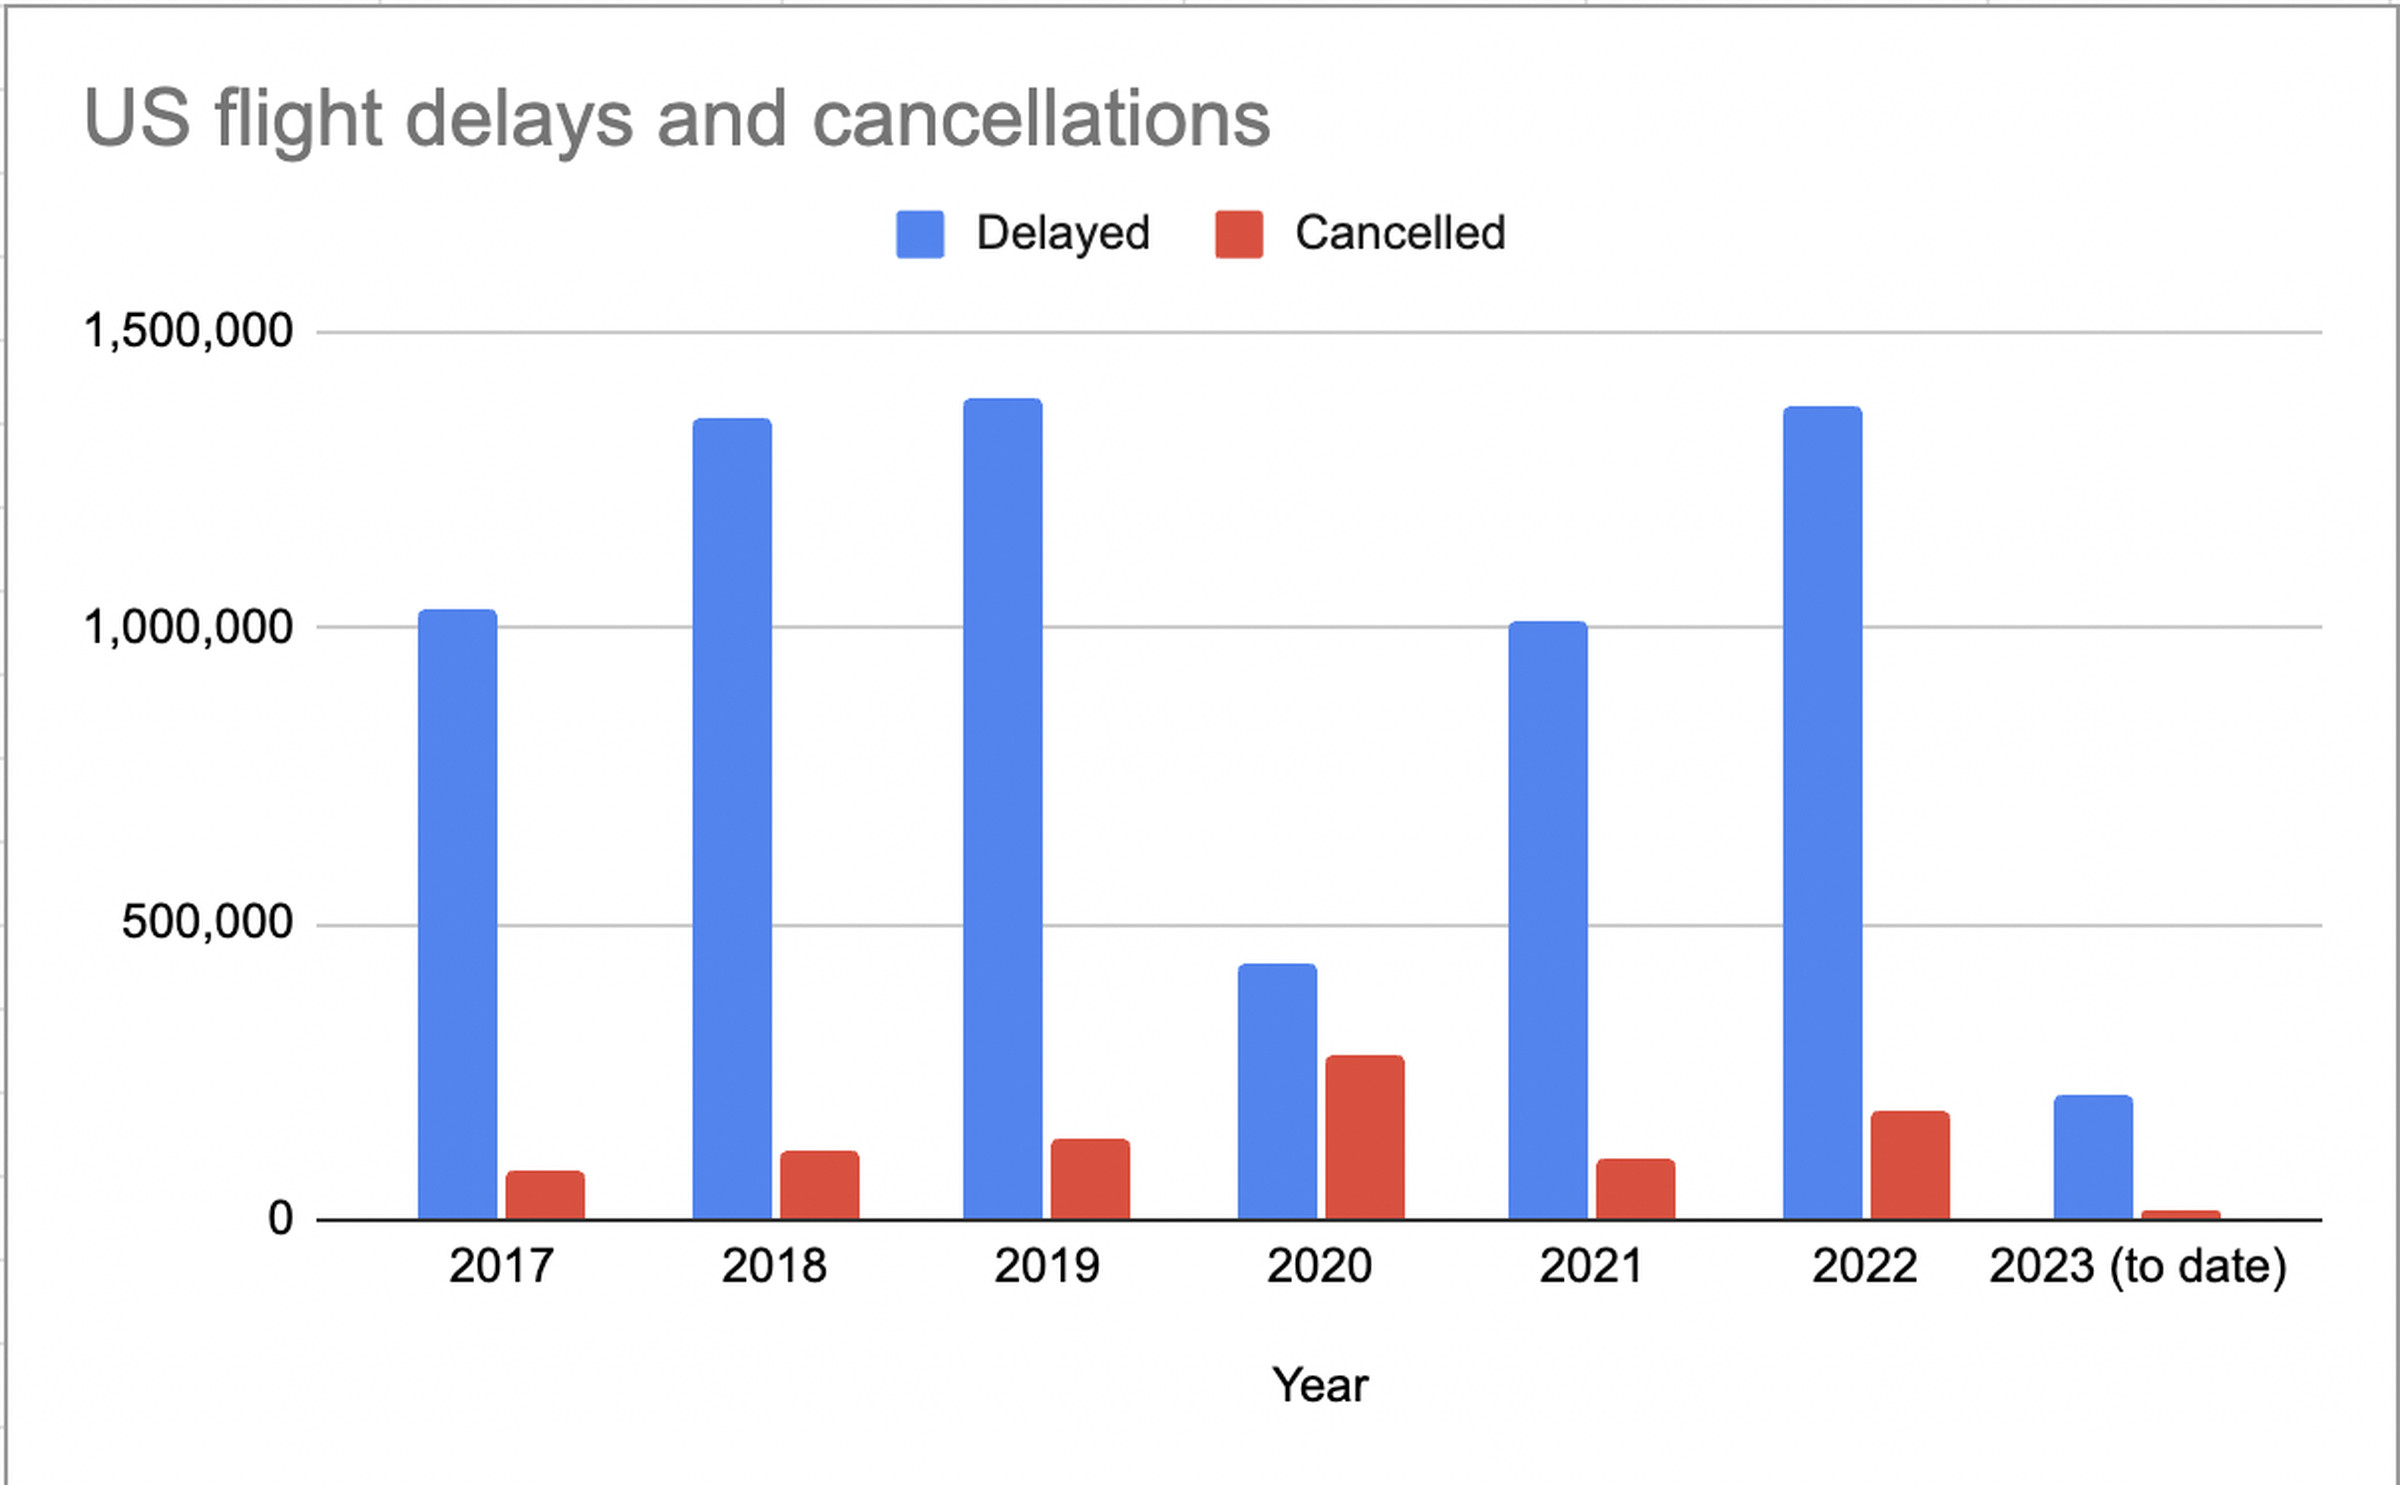 The number of flight cancellations has been steadily rising over the last four years (not including 2020 because of covid). 